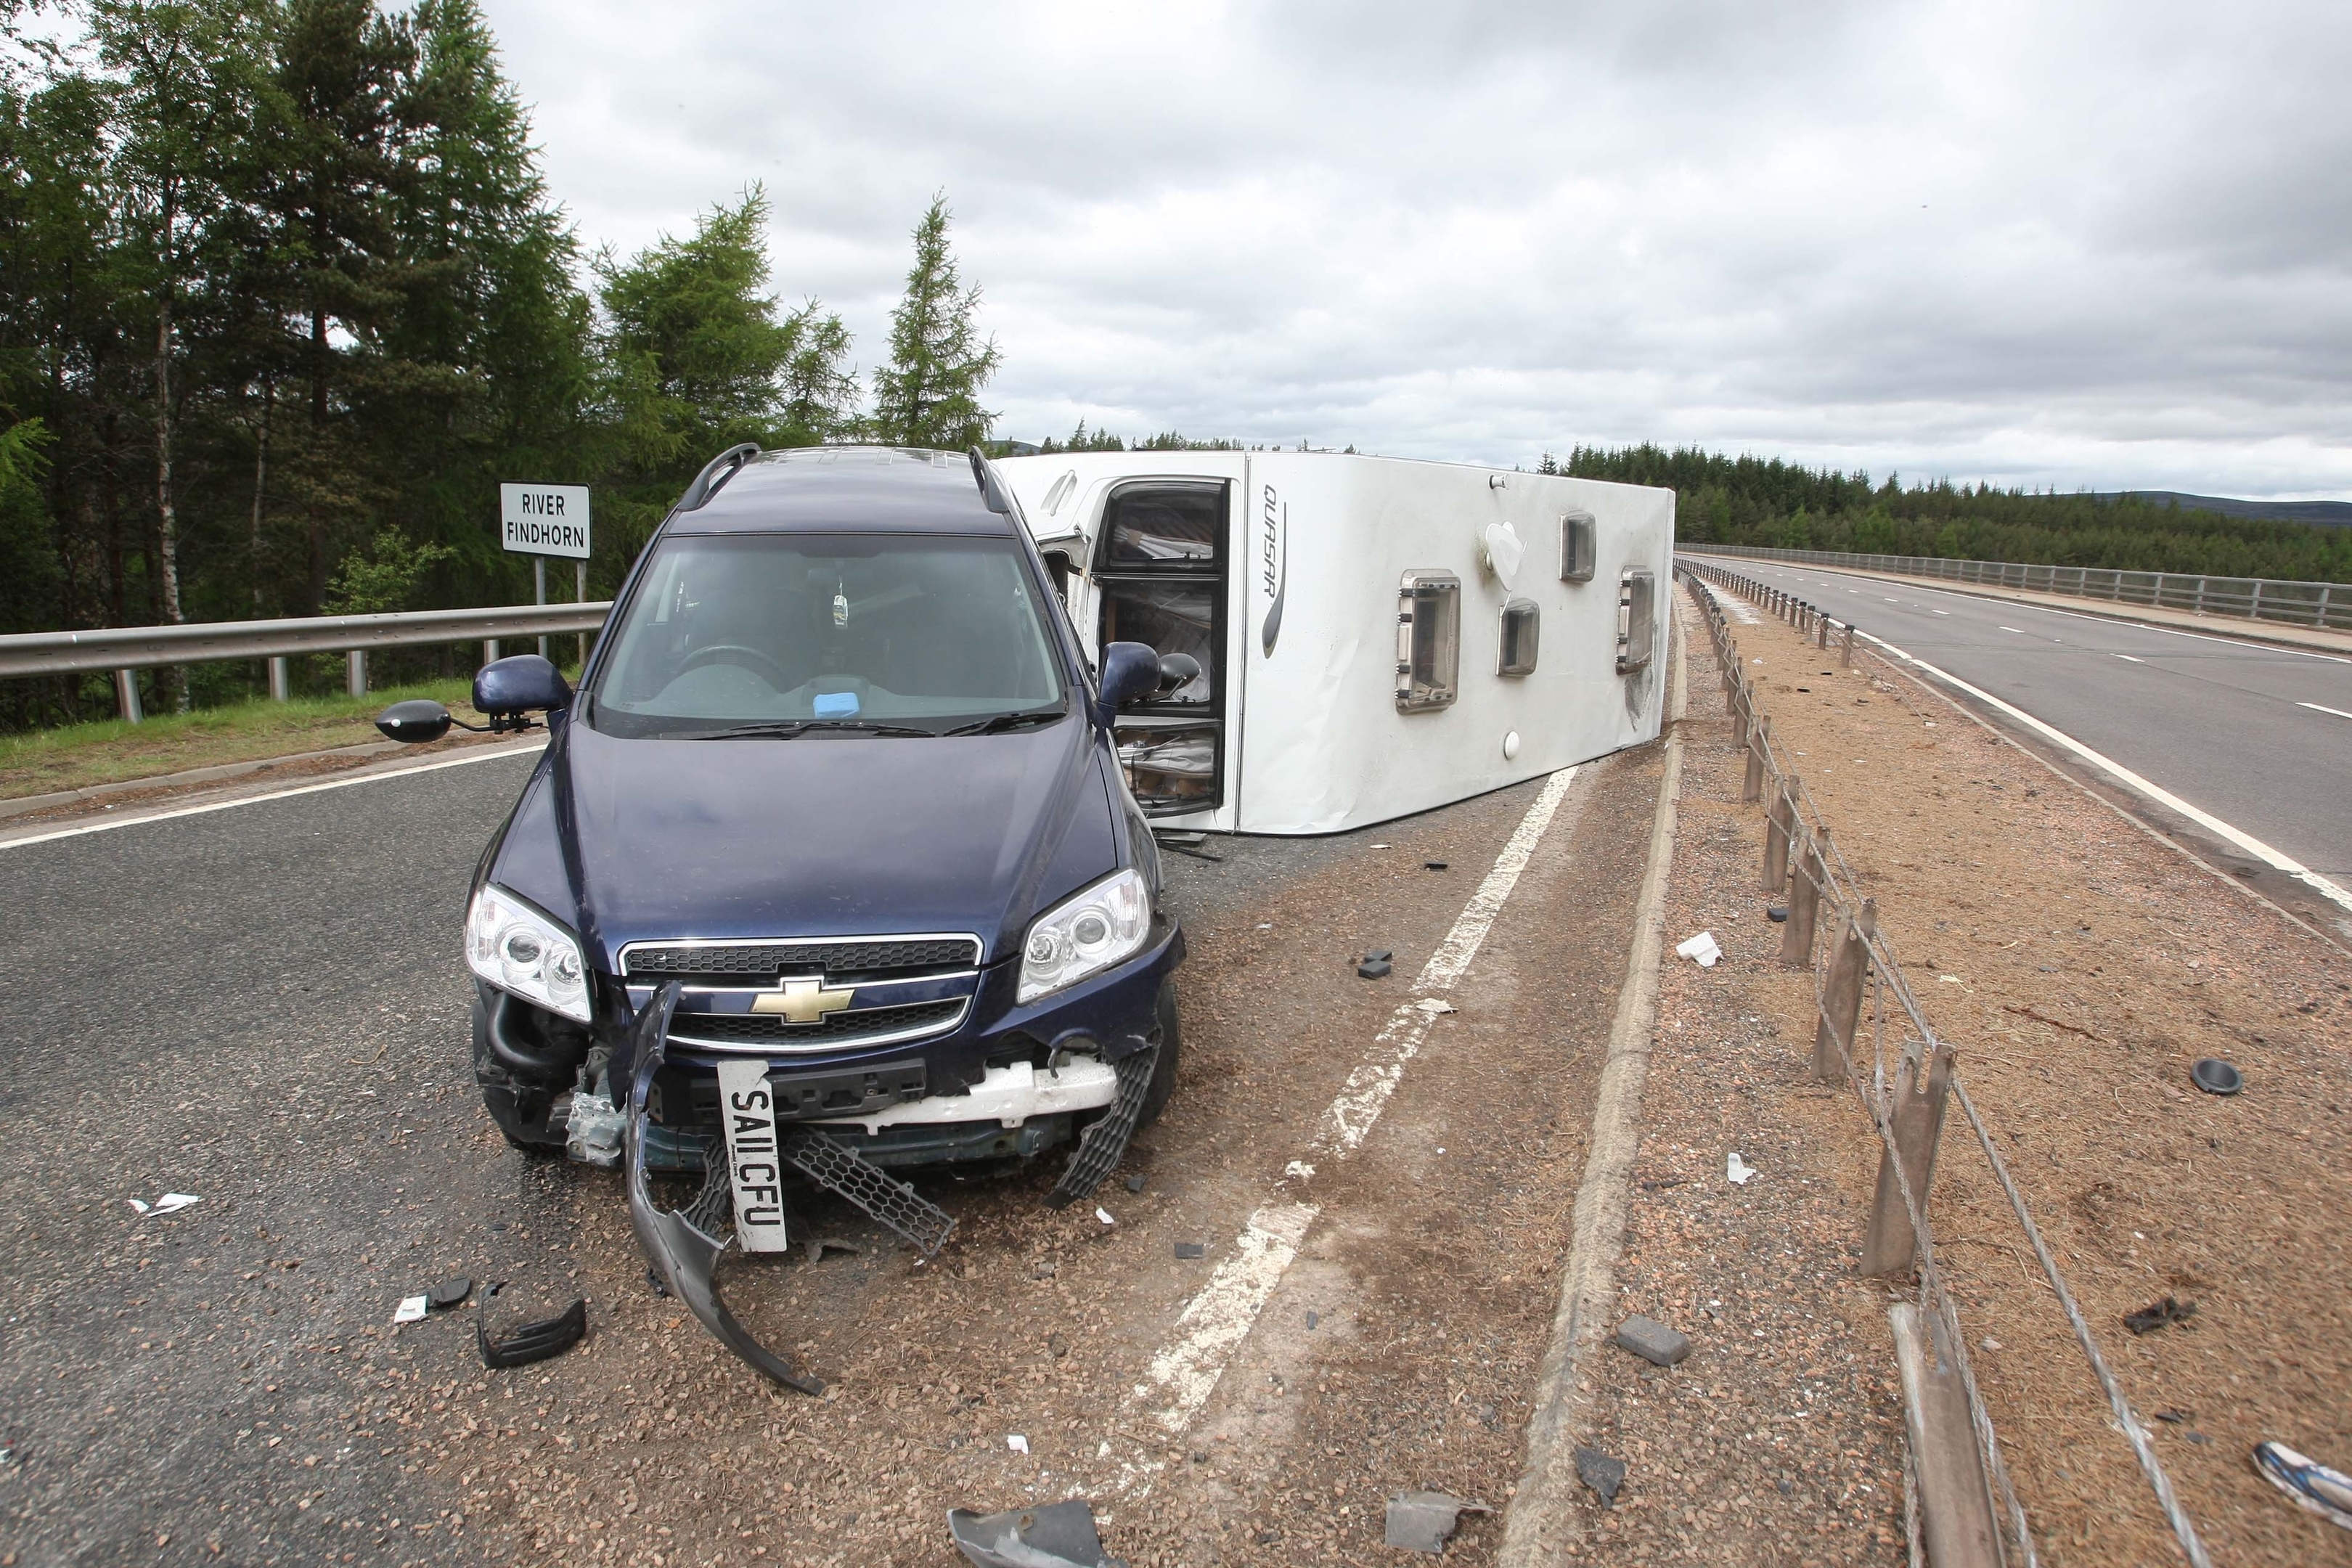 Scene of the crash involving a car and caravan on the A9